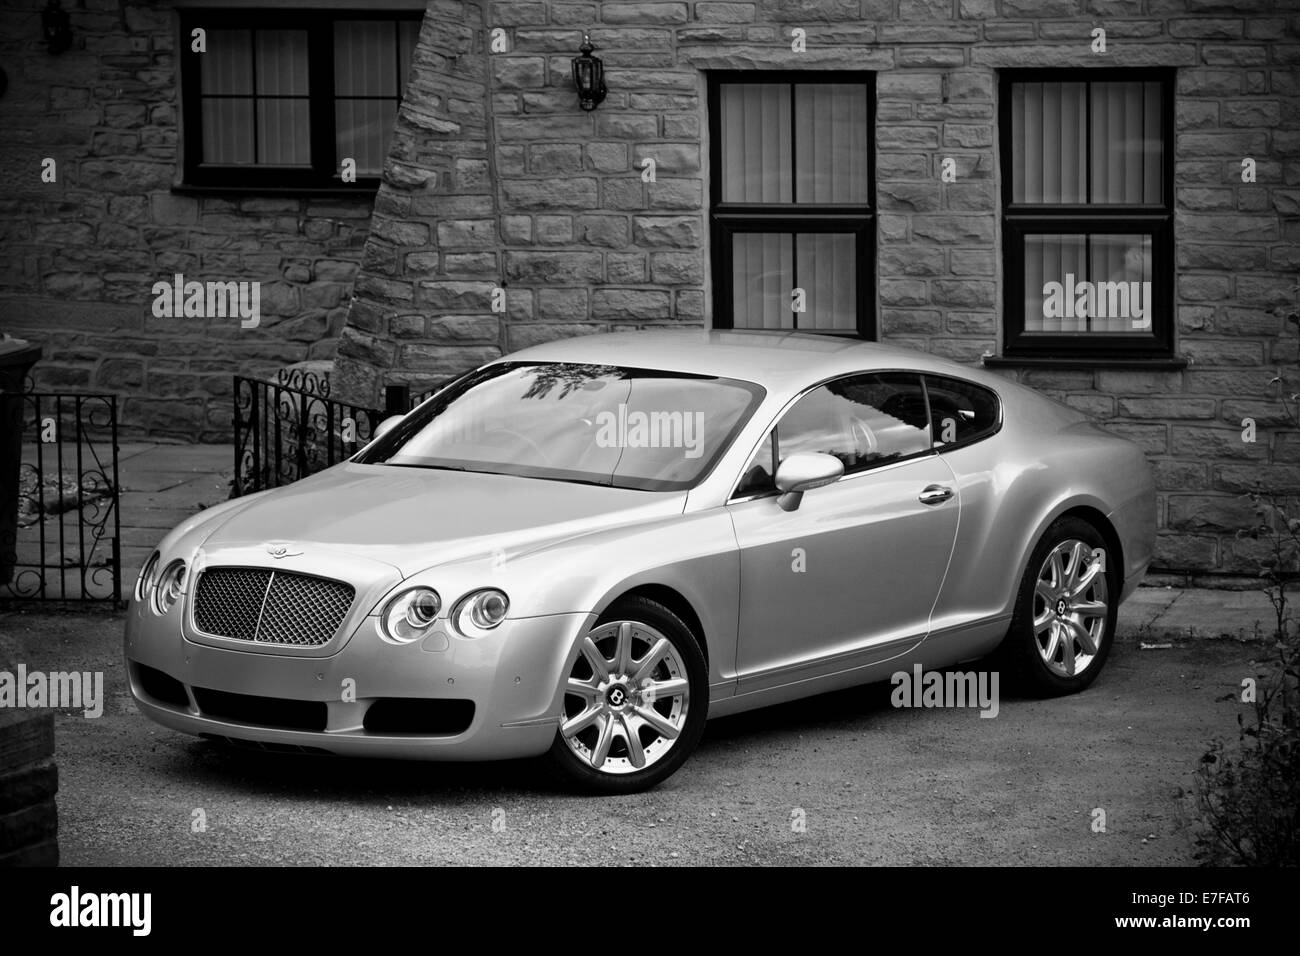 Bentley Sports Coupe in black and white Stock Photo